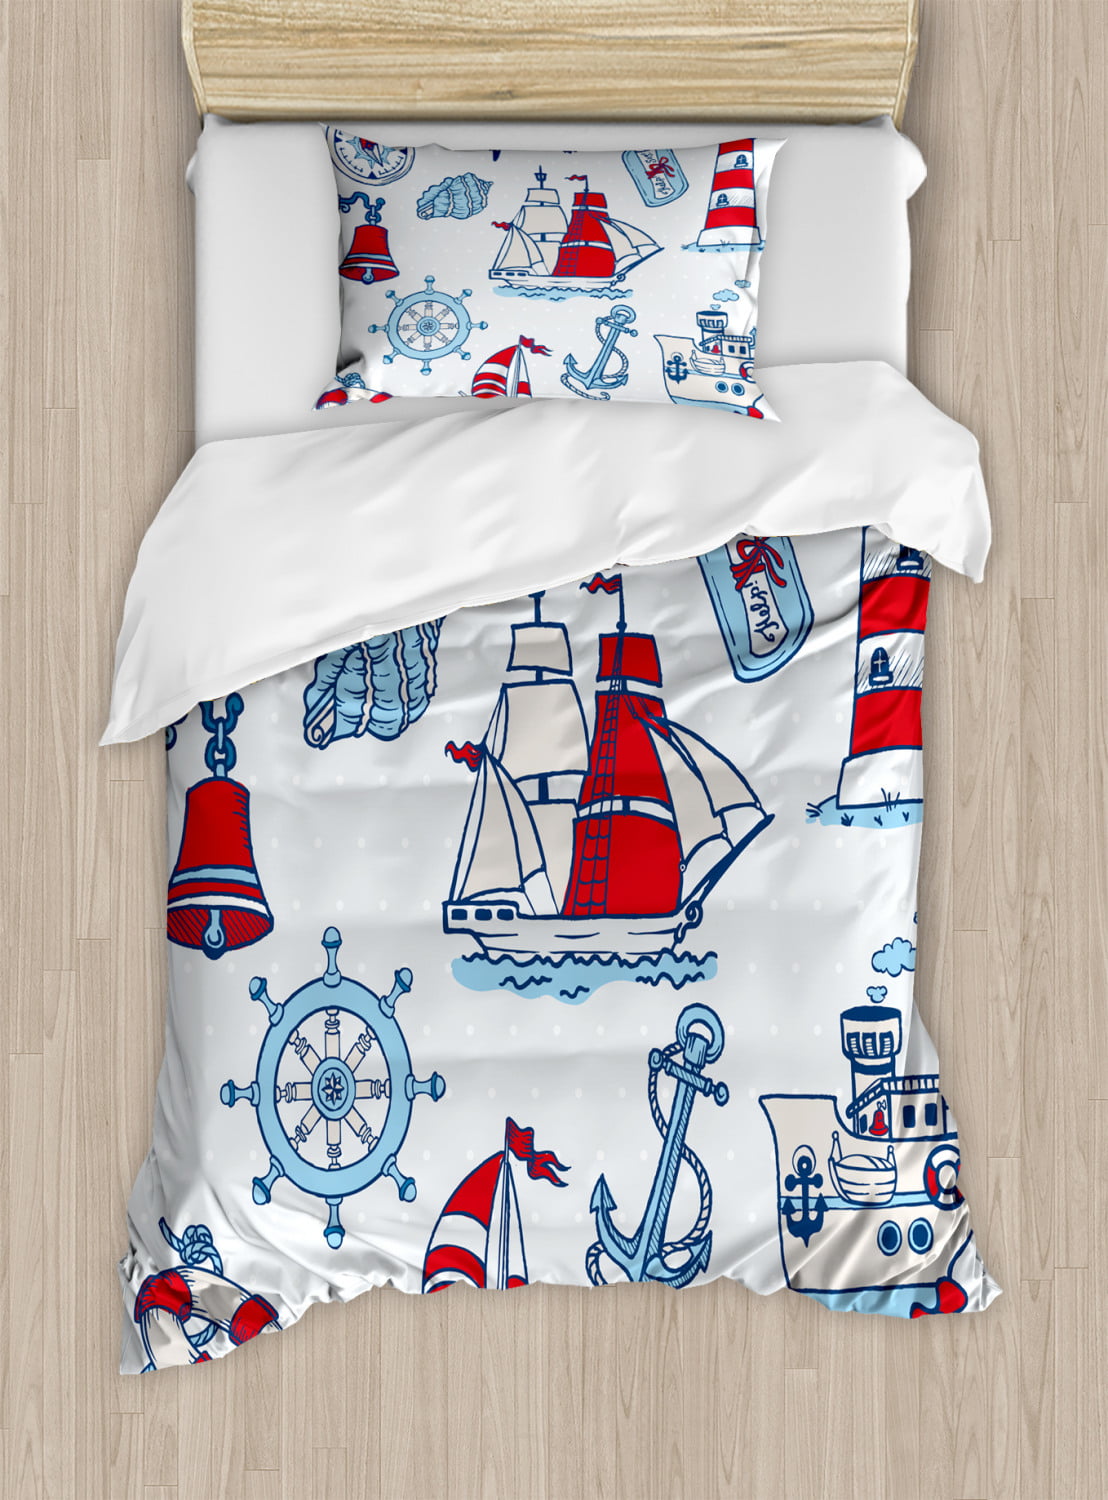 NAUTICAL BLUE WHITE SHIP BOAT ANCHOR LIGHTHOUSE COMPASS ROPE BEDDING OR CURTAINS 